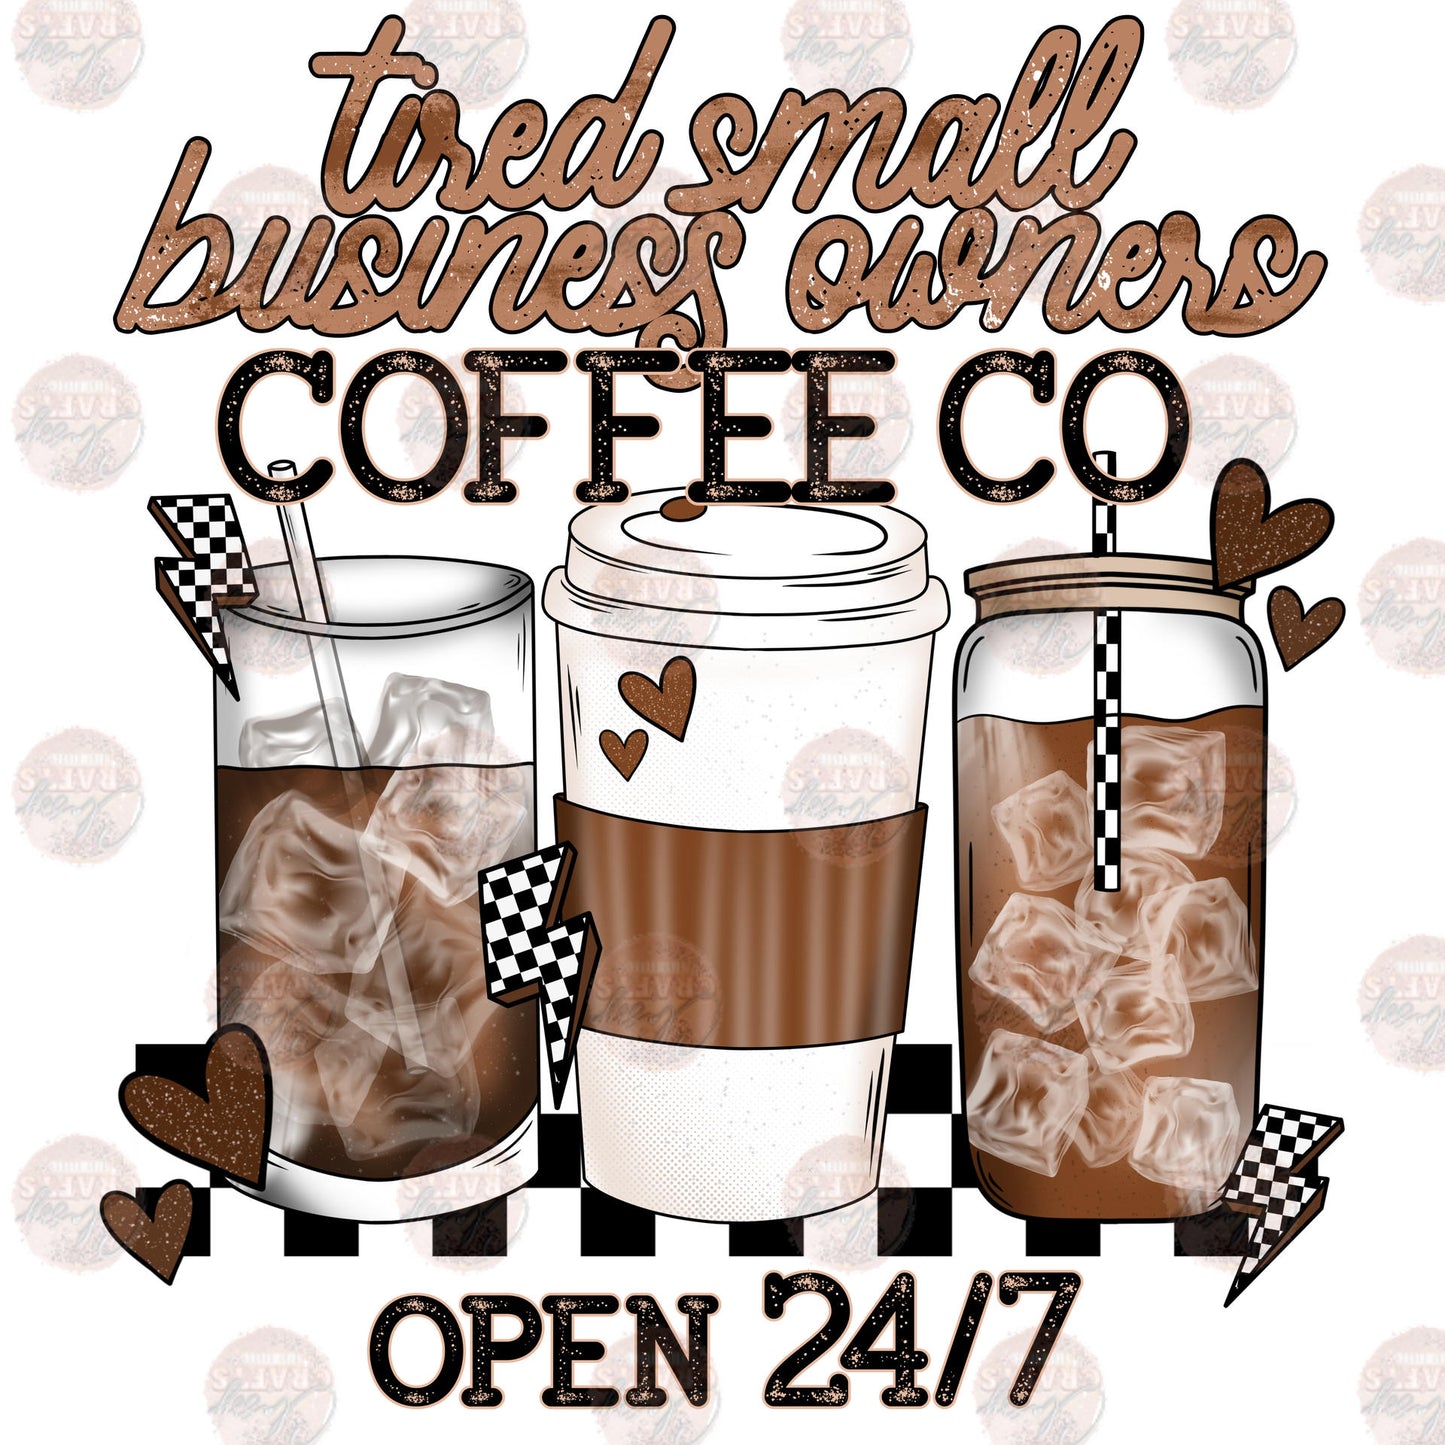 Tired Small Business Coffee Transfer